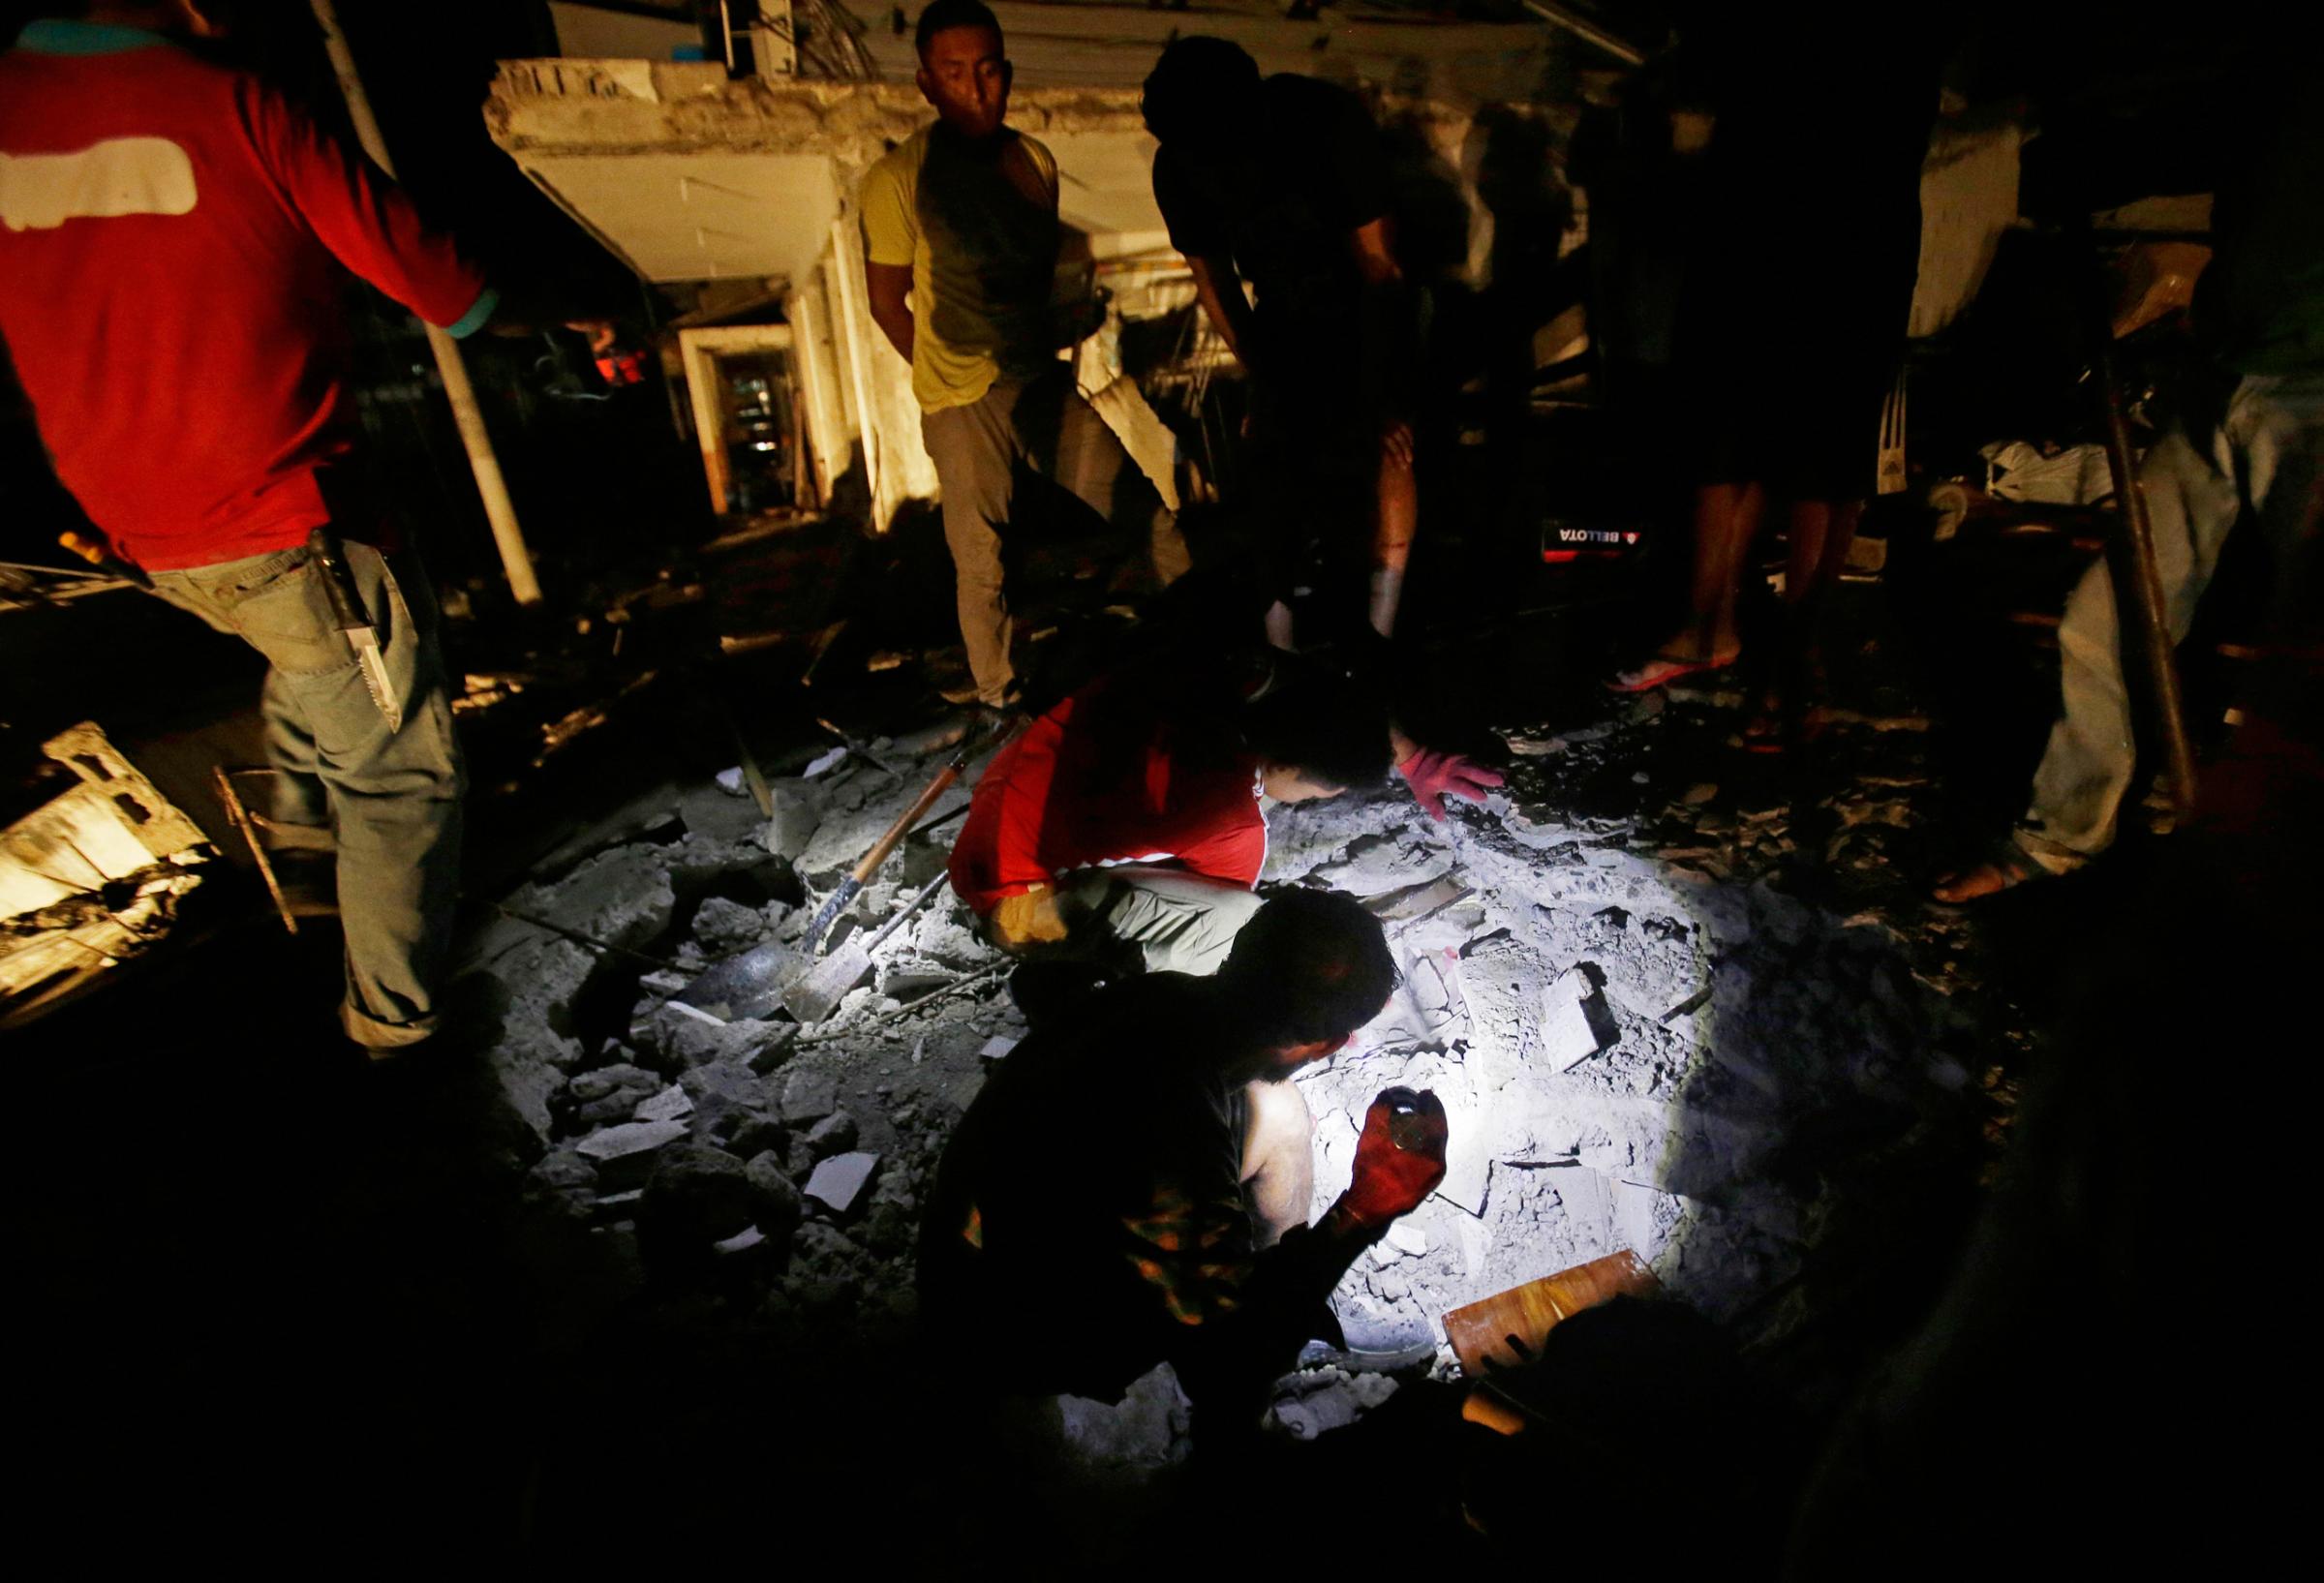 Ecuador EarthquakeResidents look for survivors in the rubble of a destroyed house sleep in the Pacific coastal town of Pedernales, Ecuador, Sunday, April 17, 2016. The strongest earthquake to hit Ecuador in decades flattened buildings and buckled highways along its Pacific coast, sending the Andean nation into a state of emergency. As rescue workers rushed in, officials said Sunday at least 77 people were killed, over 570 injured and the damage stretched for hundreds of miles to the capital and other major cities.(AP Photo/Dolores Ochoa)